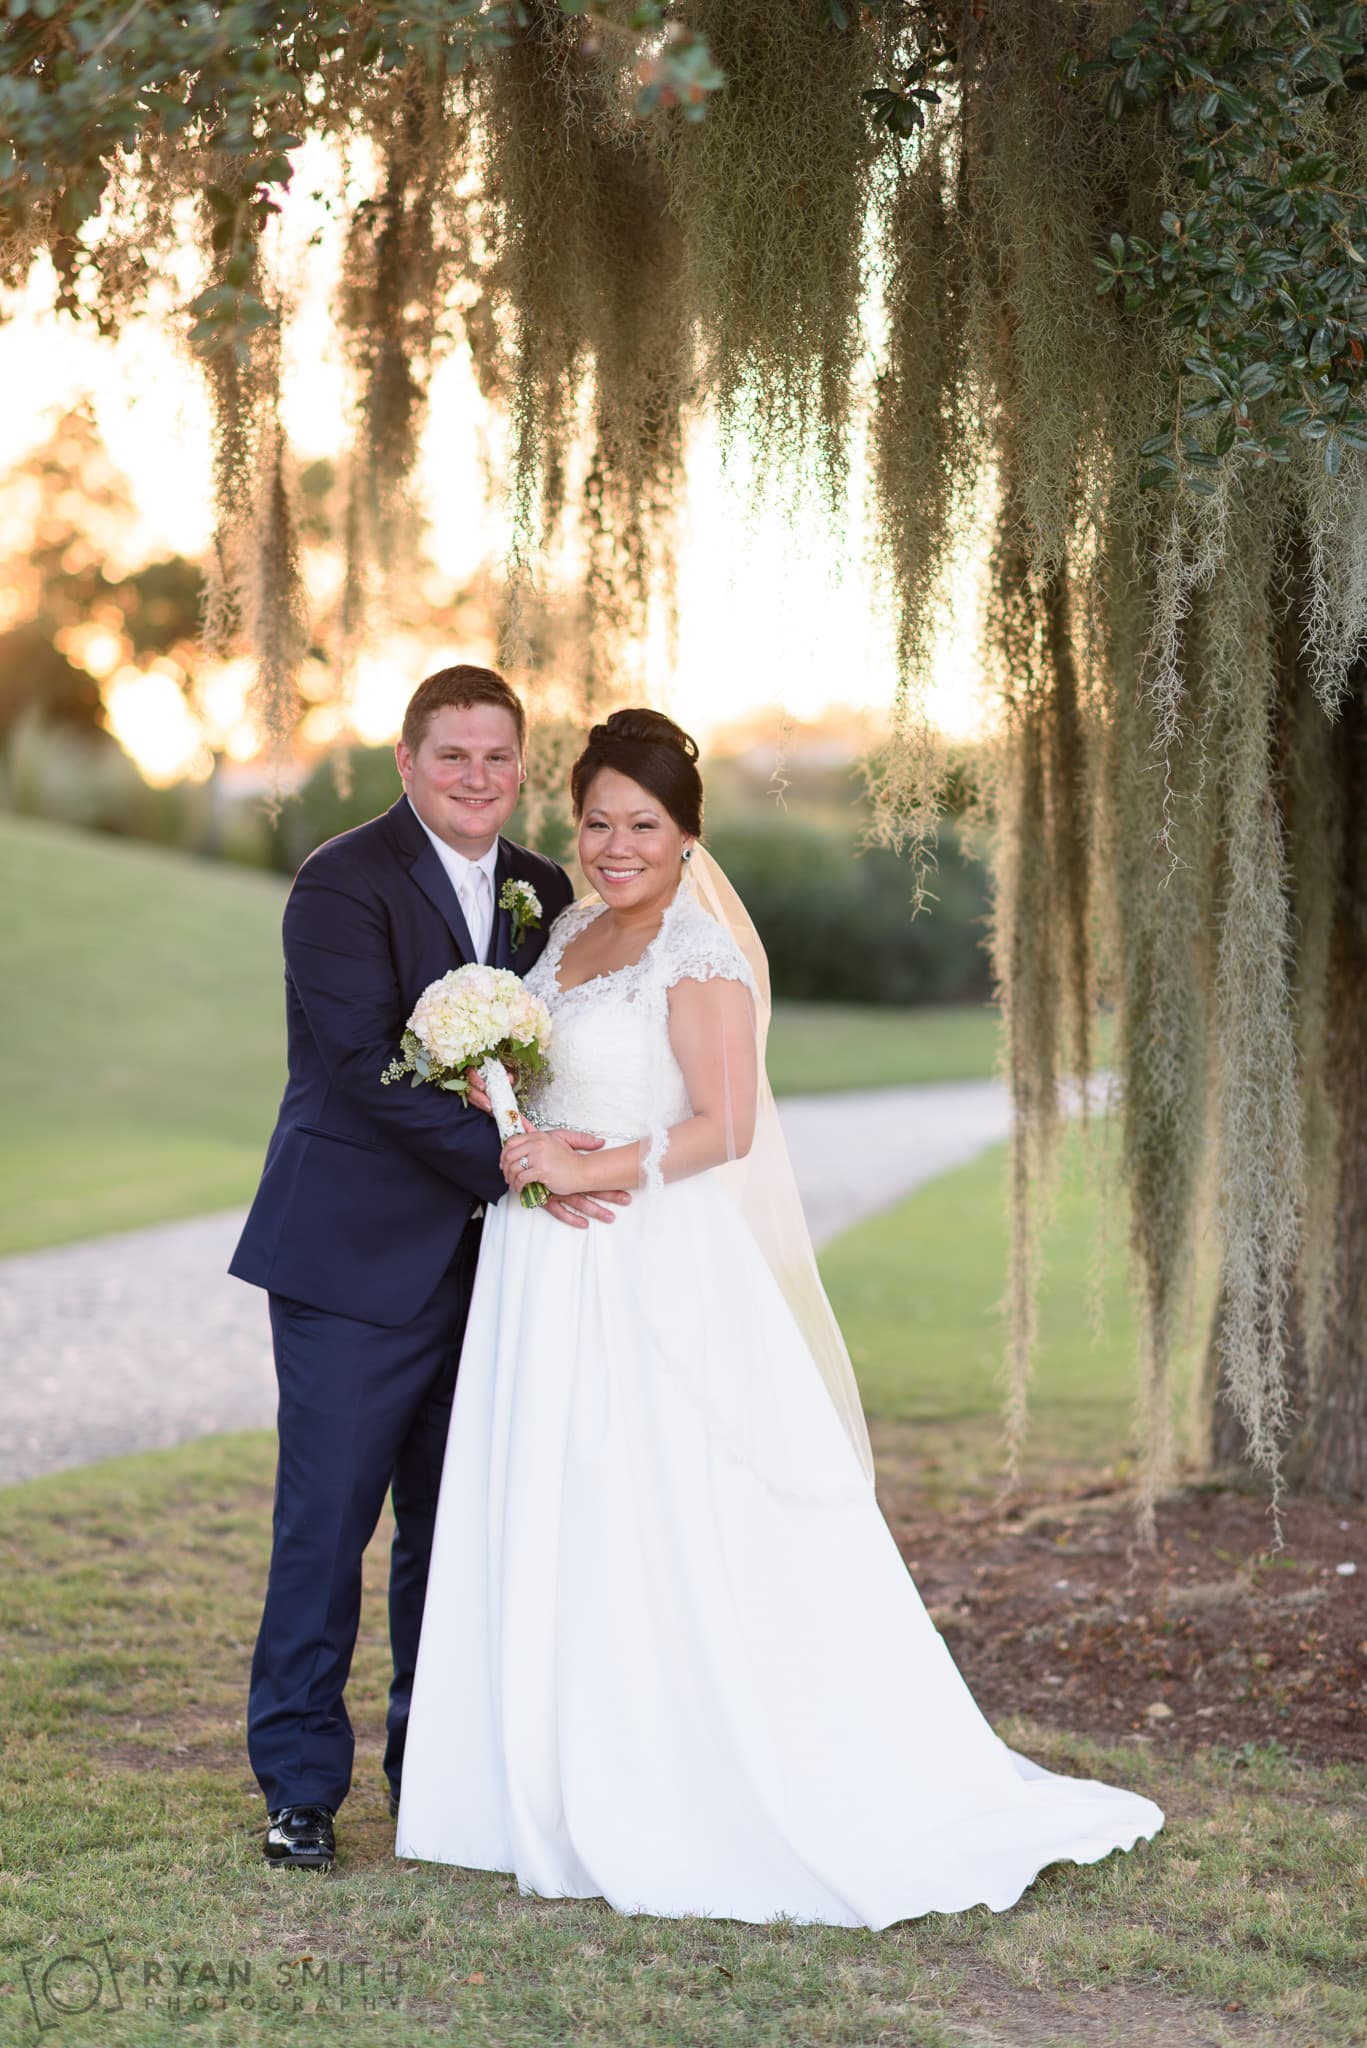 Portraits of the bride and groom under the tree moss - Dye Club at Barefoot Resort